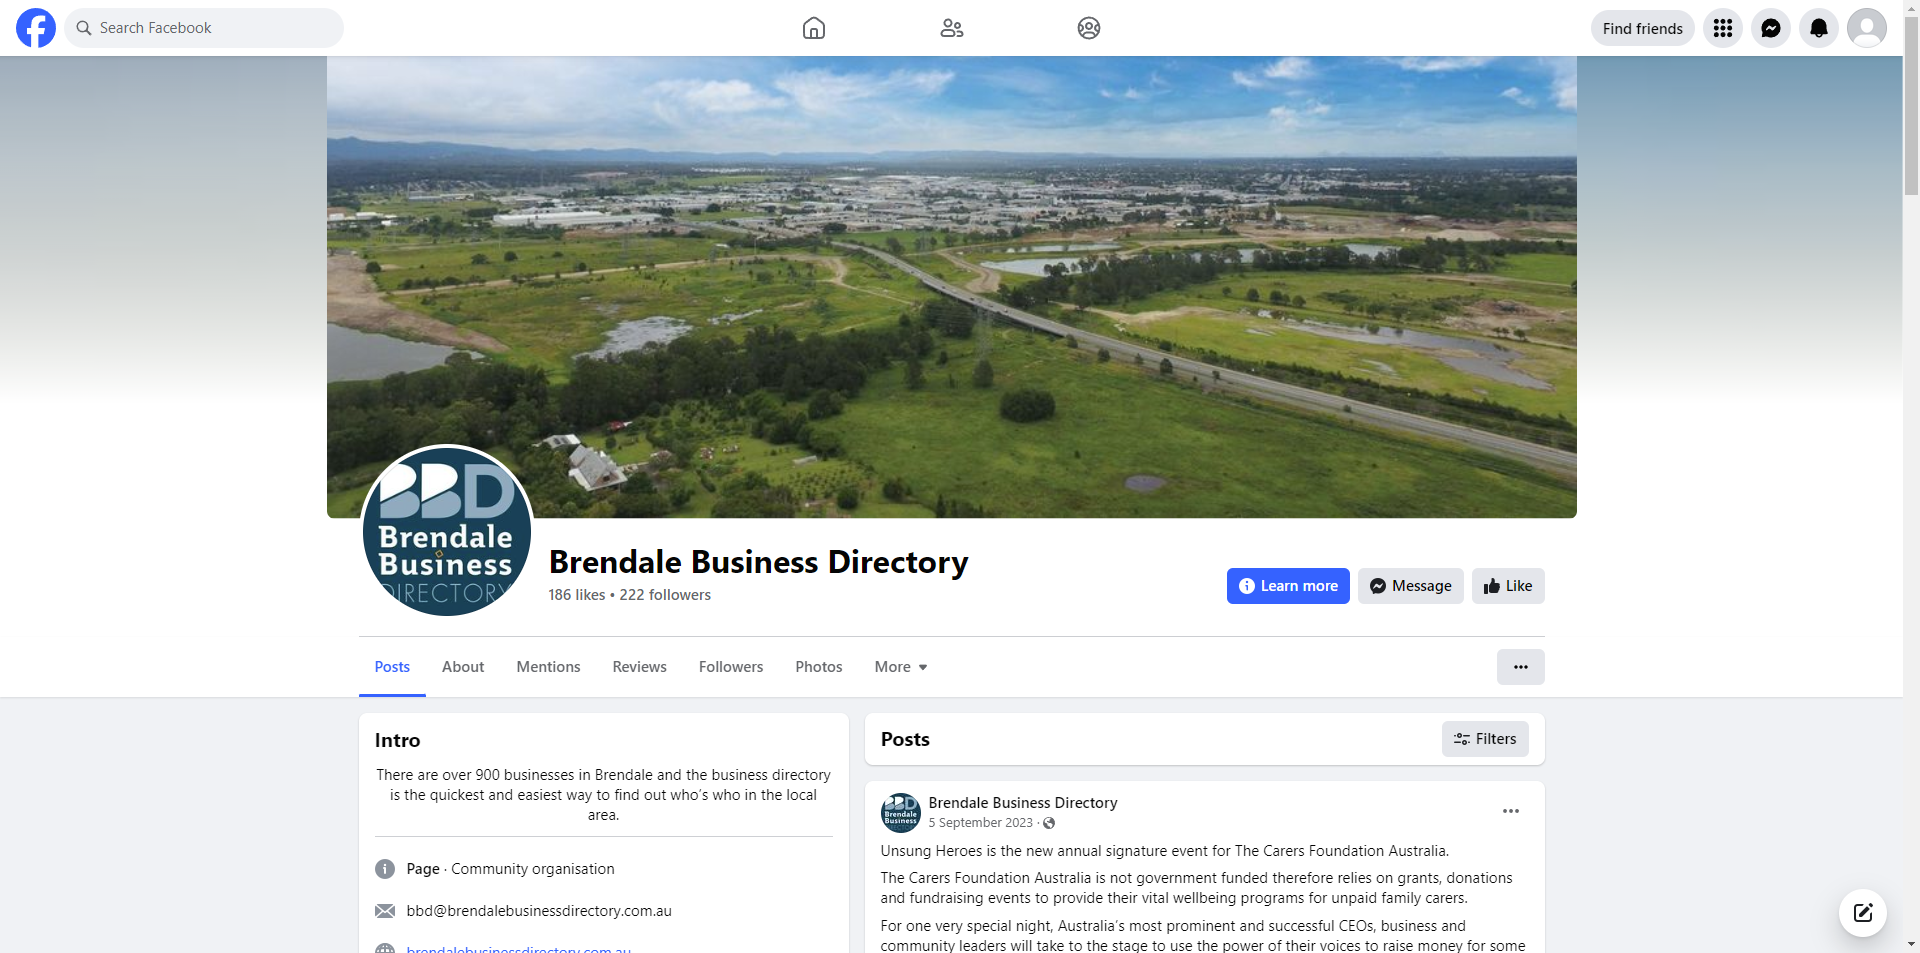 Brendale Business Directory